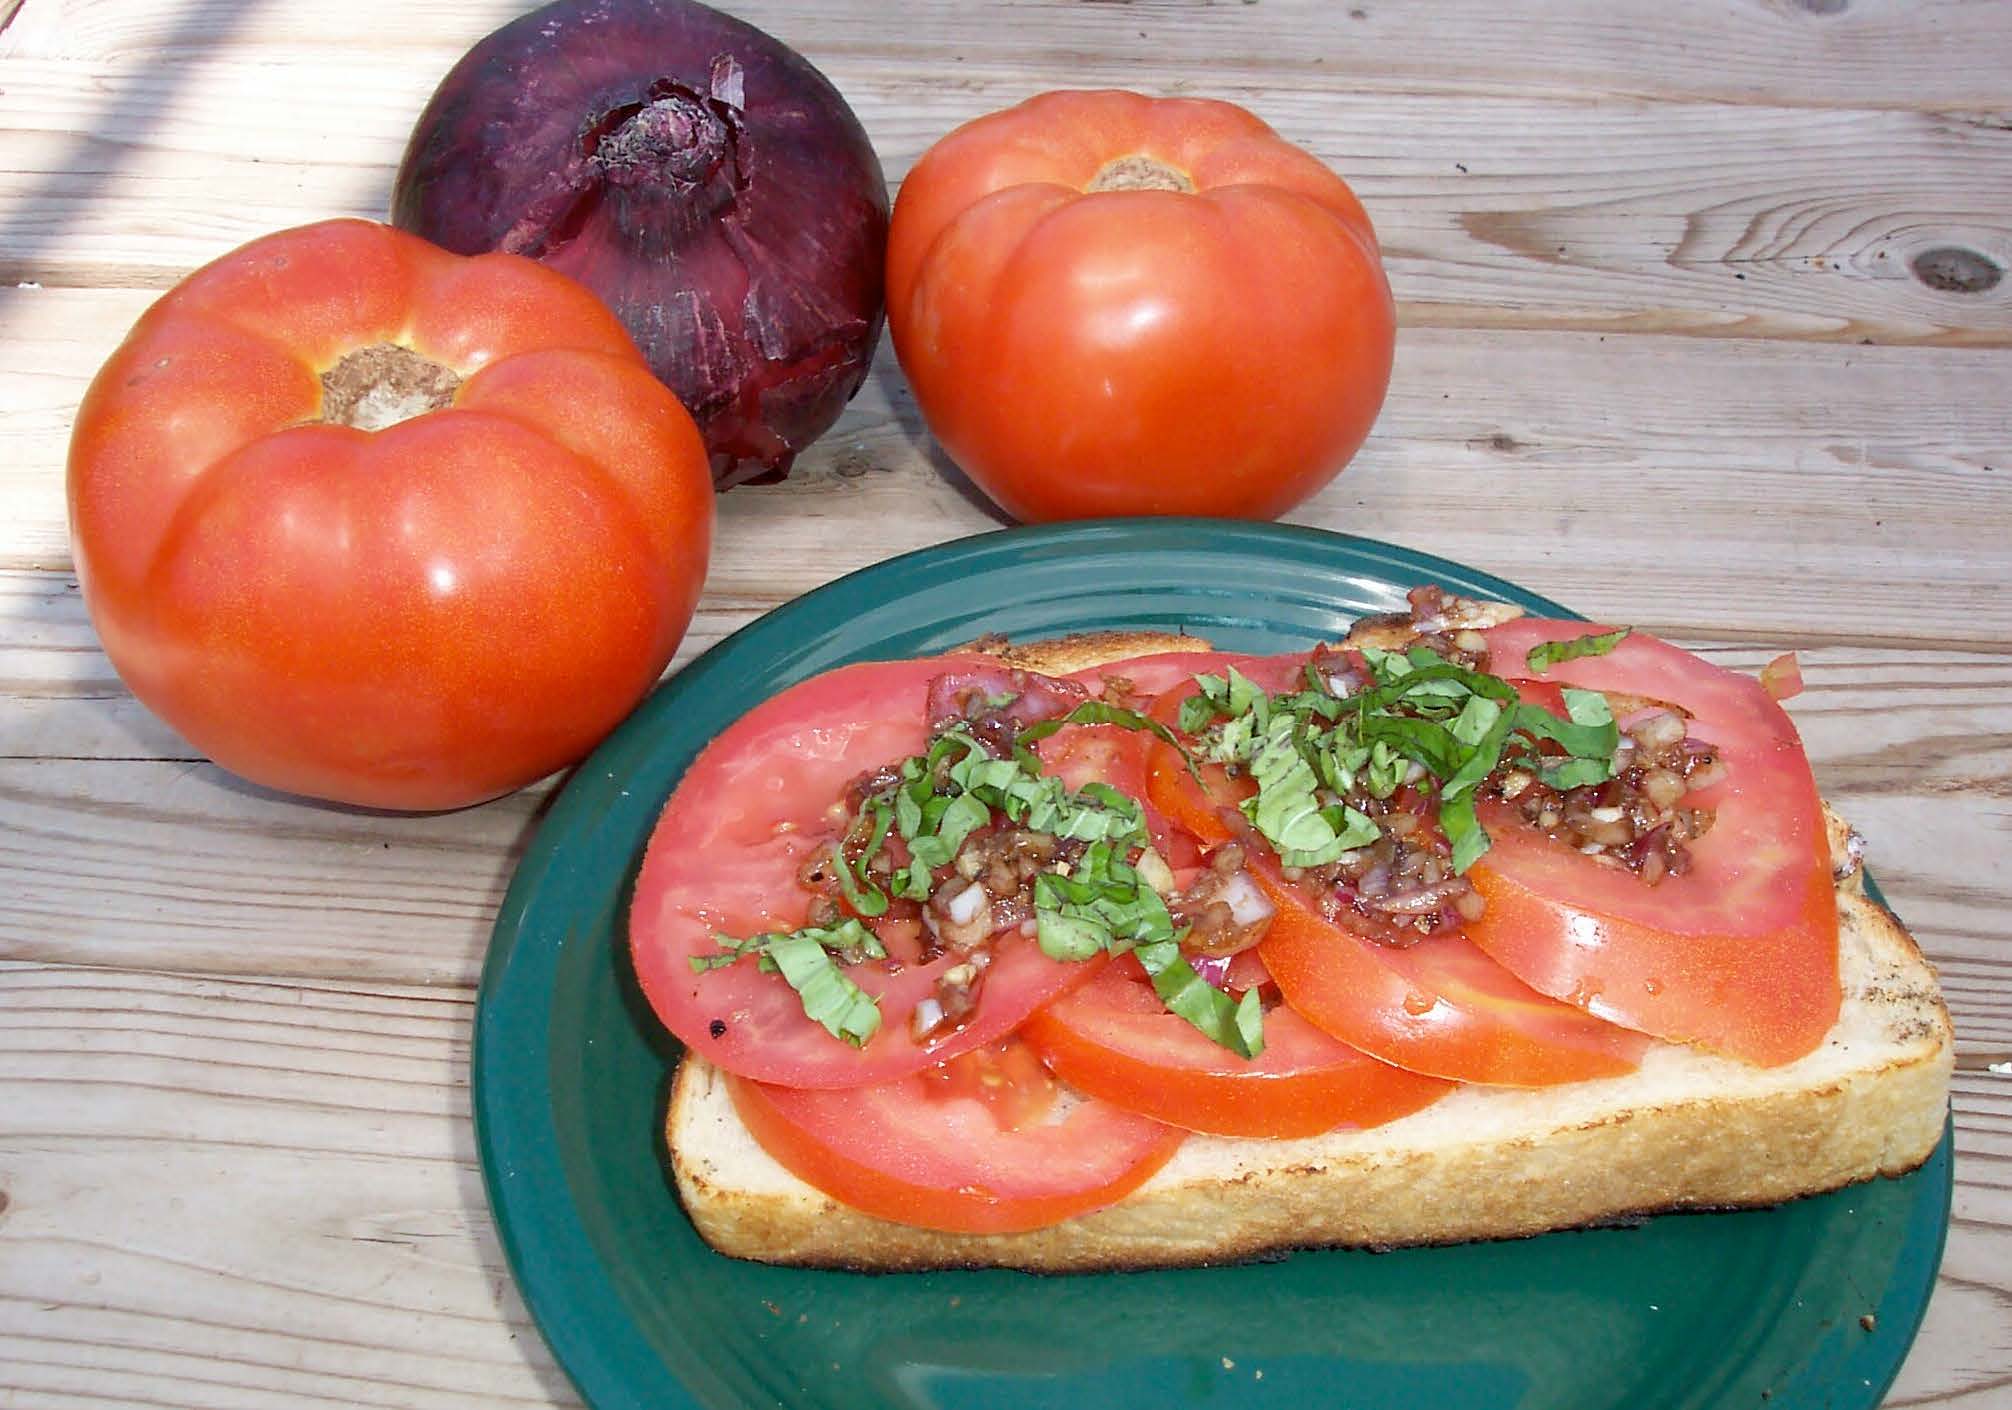 Grilled bread and tomatoes on a green plate on a wooden table with tomatoes and an onion in the background.